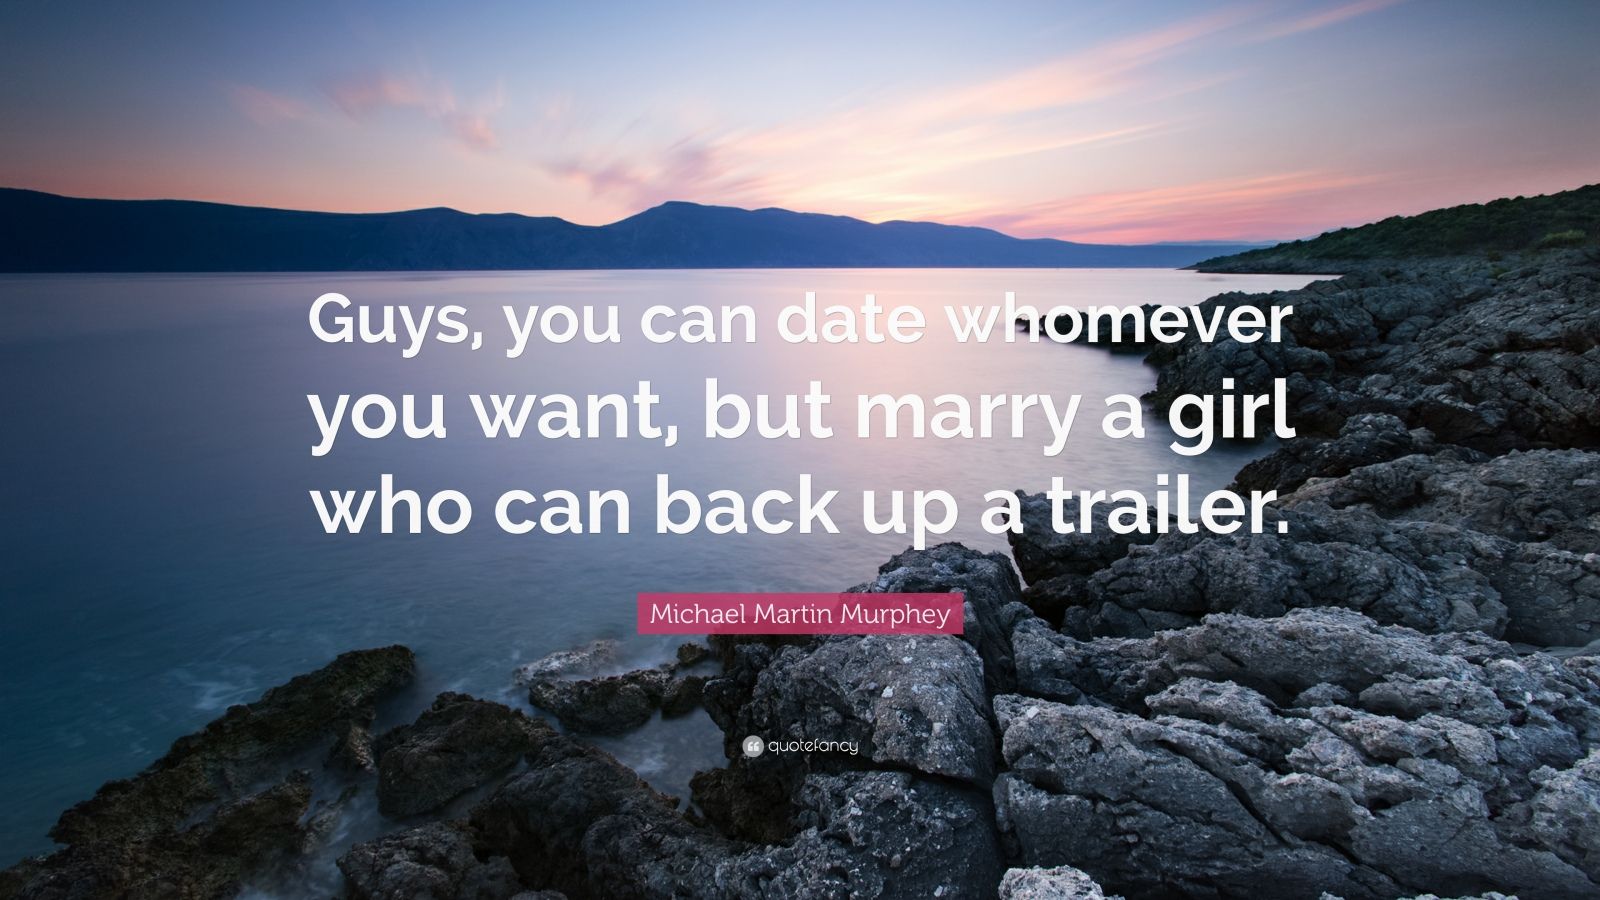 Michael Martin Murphey Quote: “Guys, you can date whomever you want ...